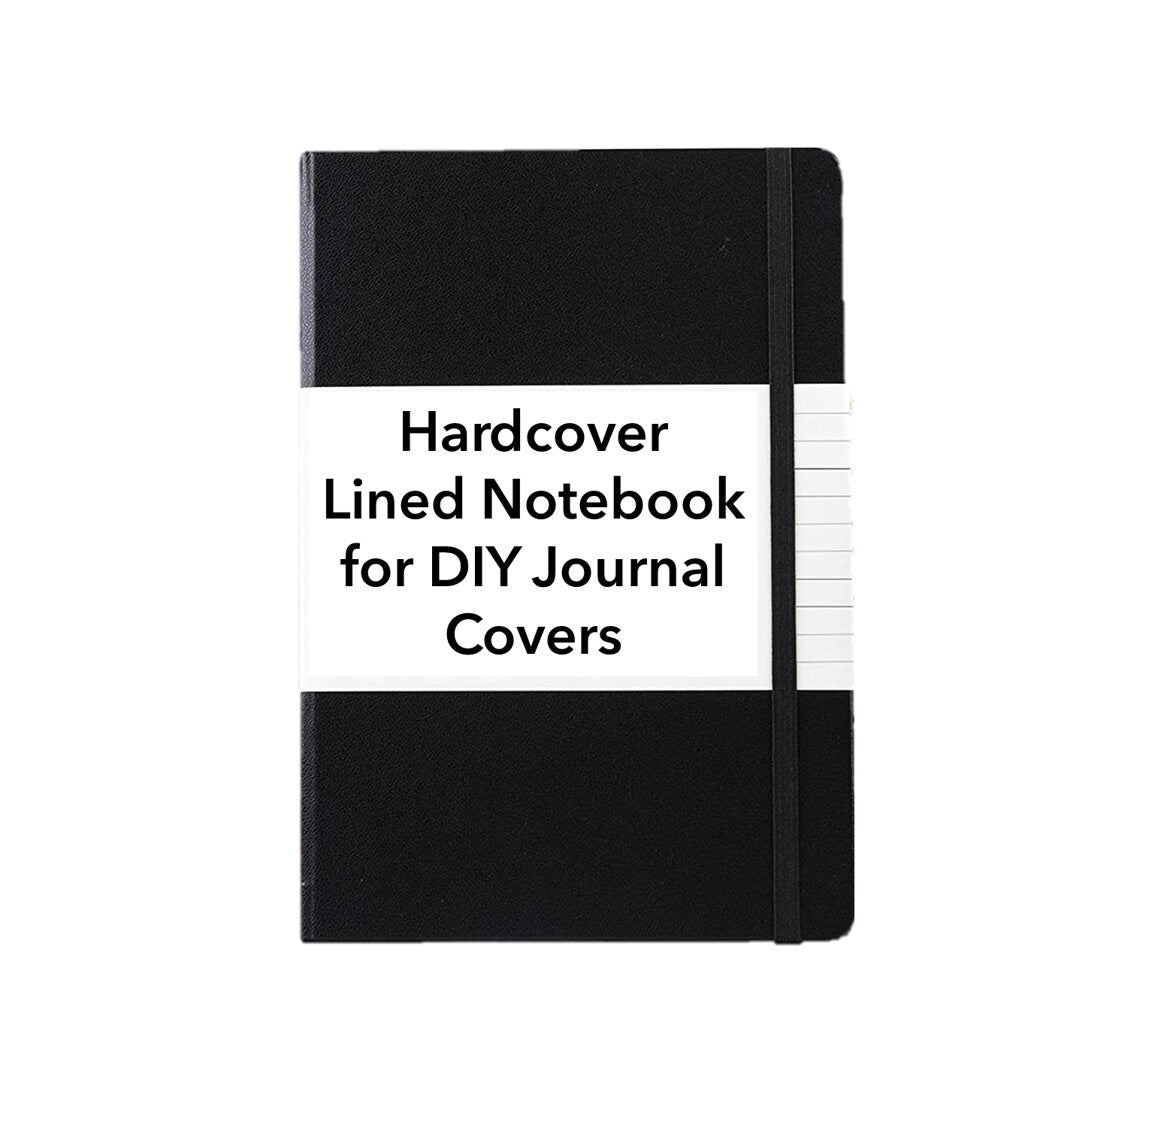 Hardcover Notebook - Hardcover Journal for DIY Journal Covers - A5 Hardback Lined Notebook - Make your own Refillable Journal Cover!